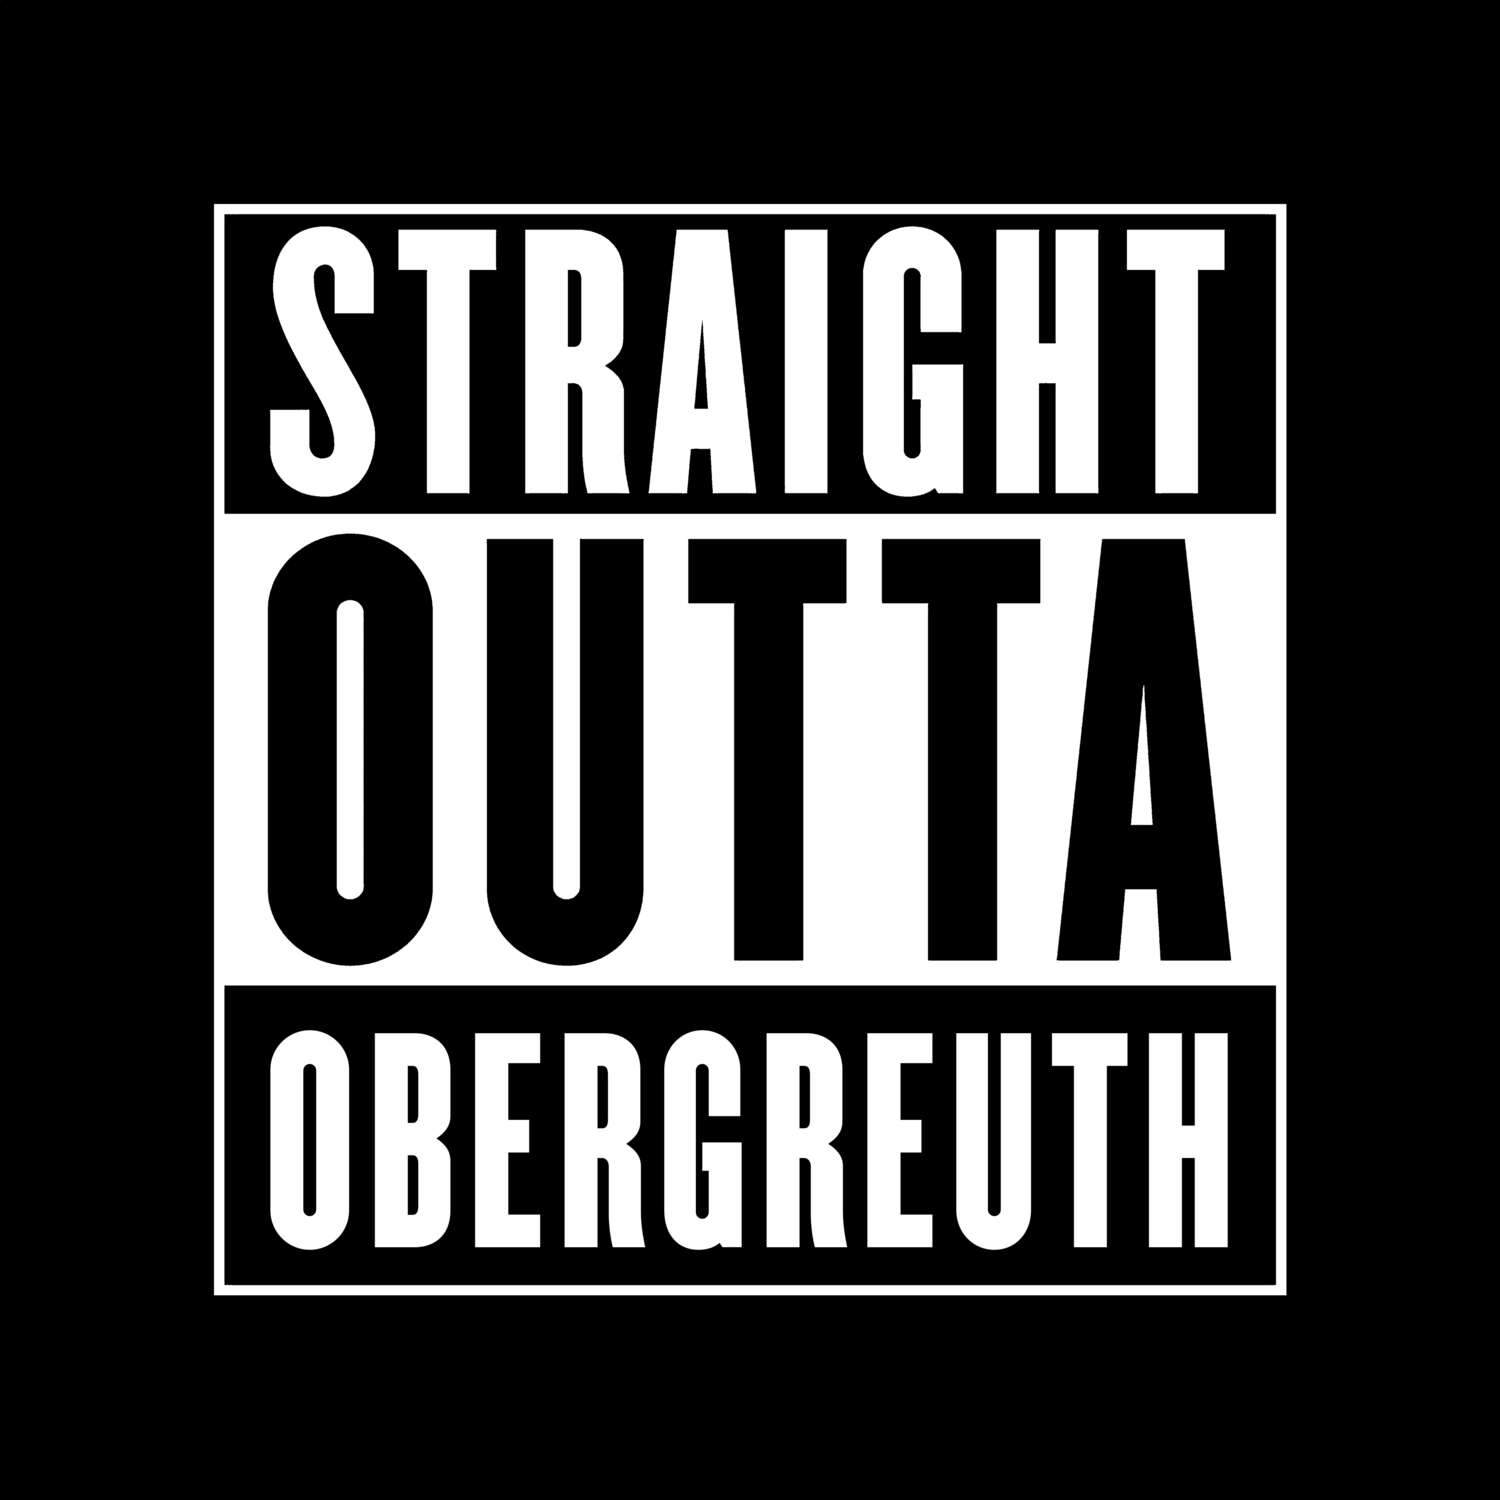 Obergreuth T-Shirt »Straight Outta«